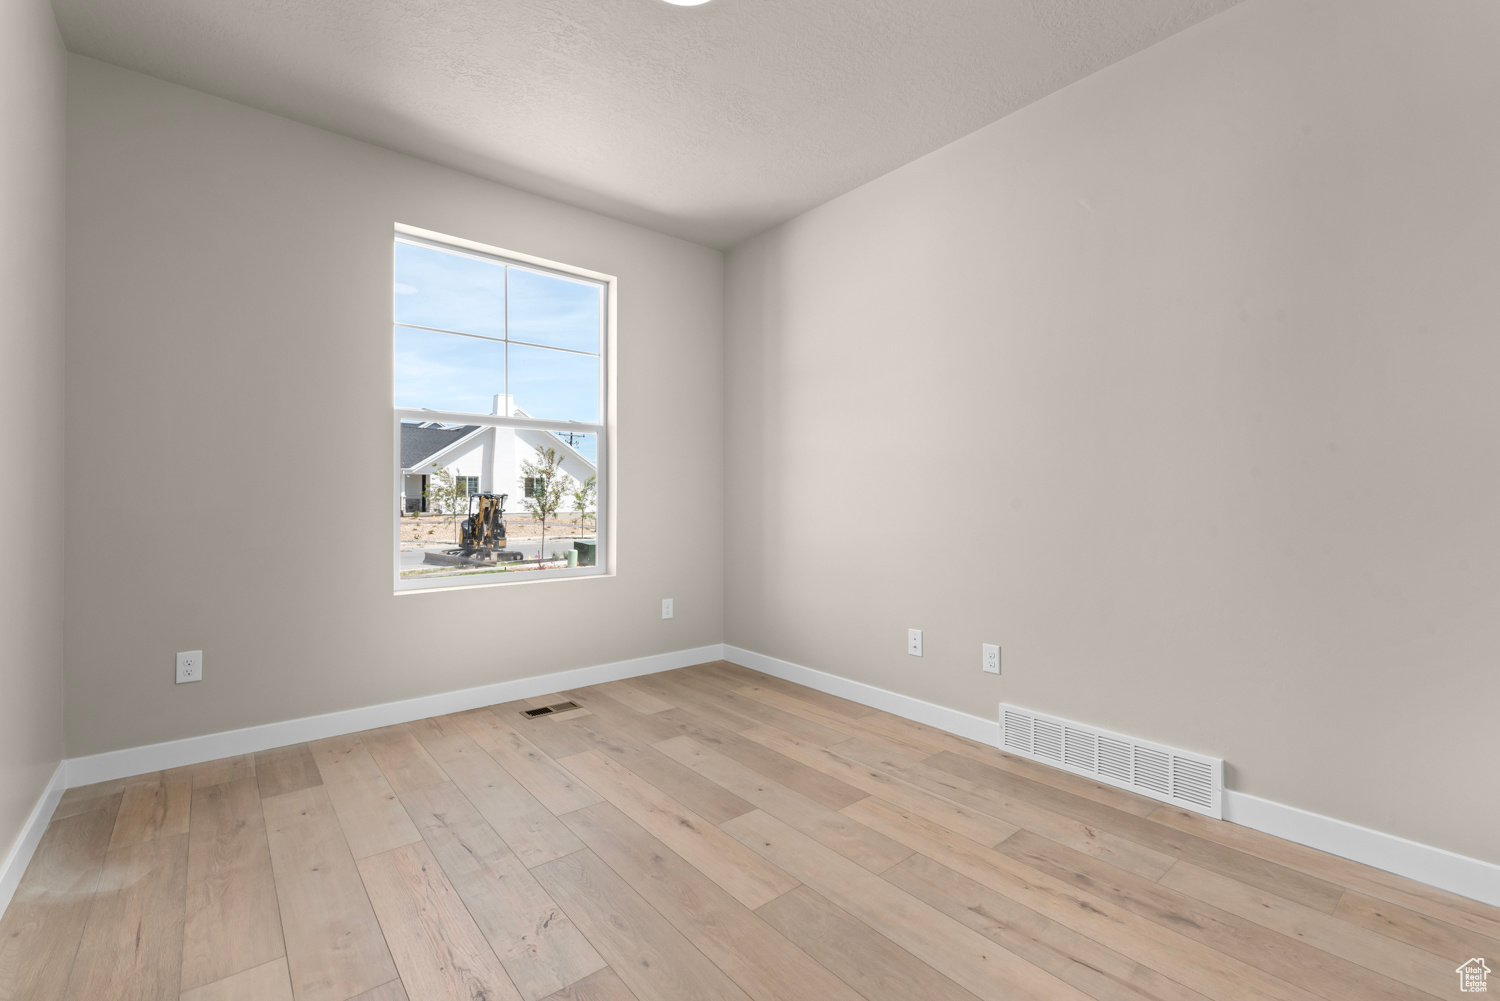 Empty room with plenty of natural light and light hardwood / wood-style flooring